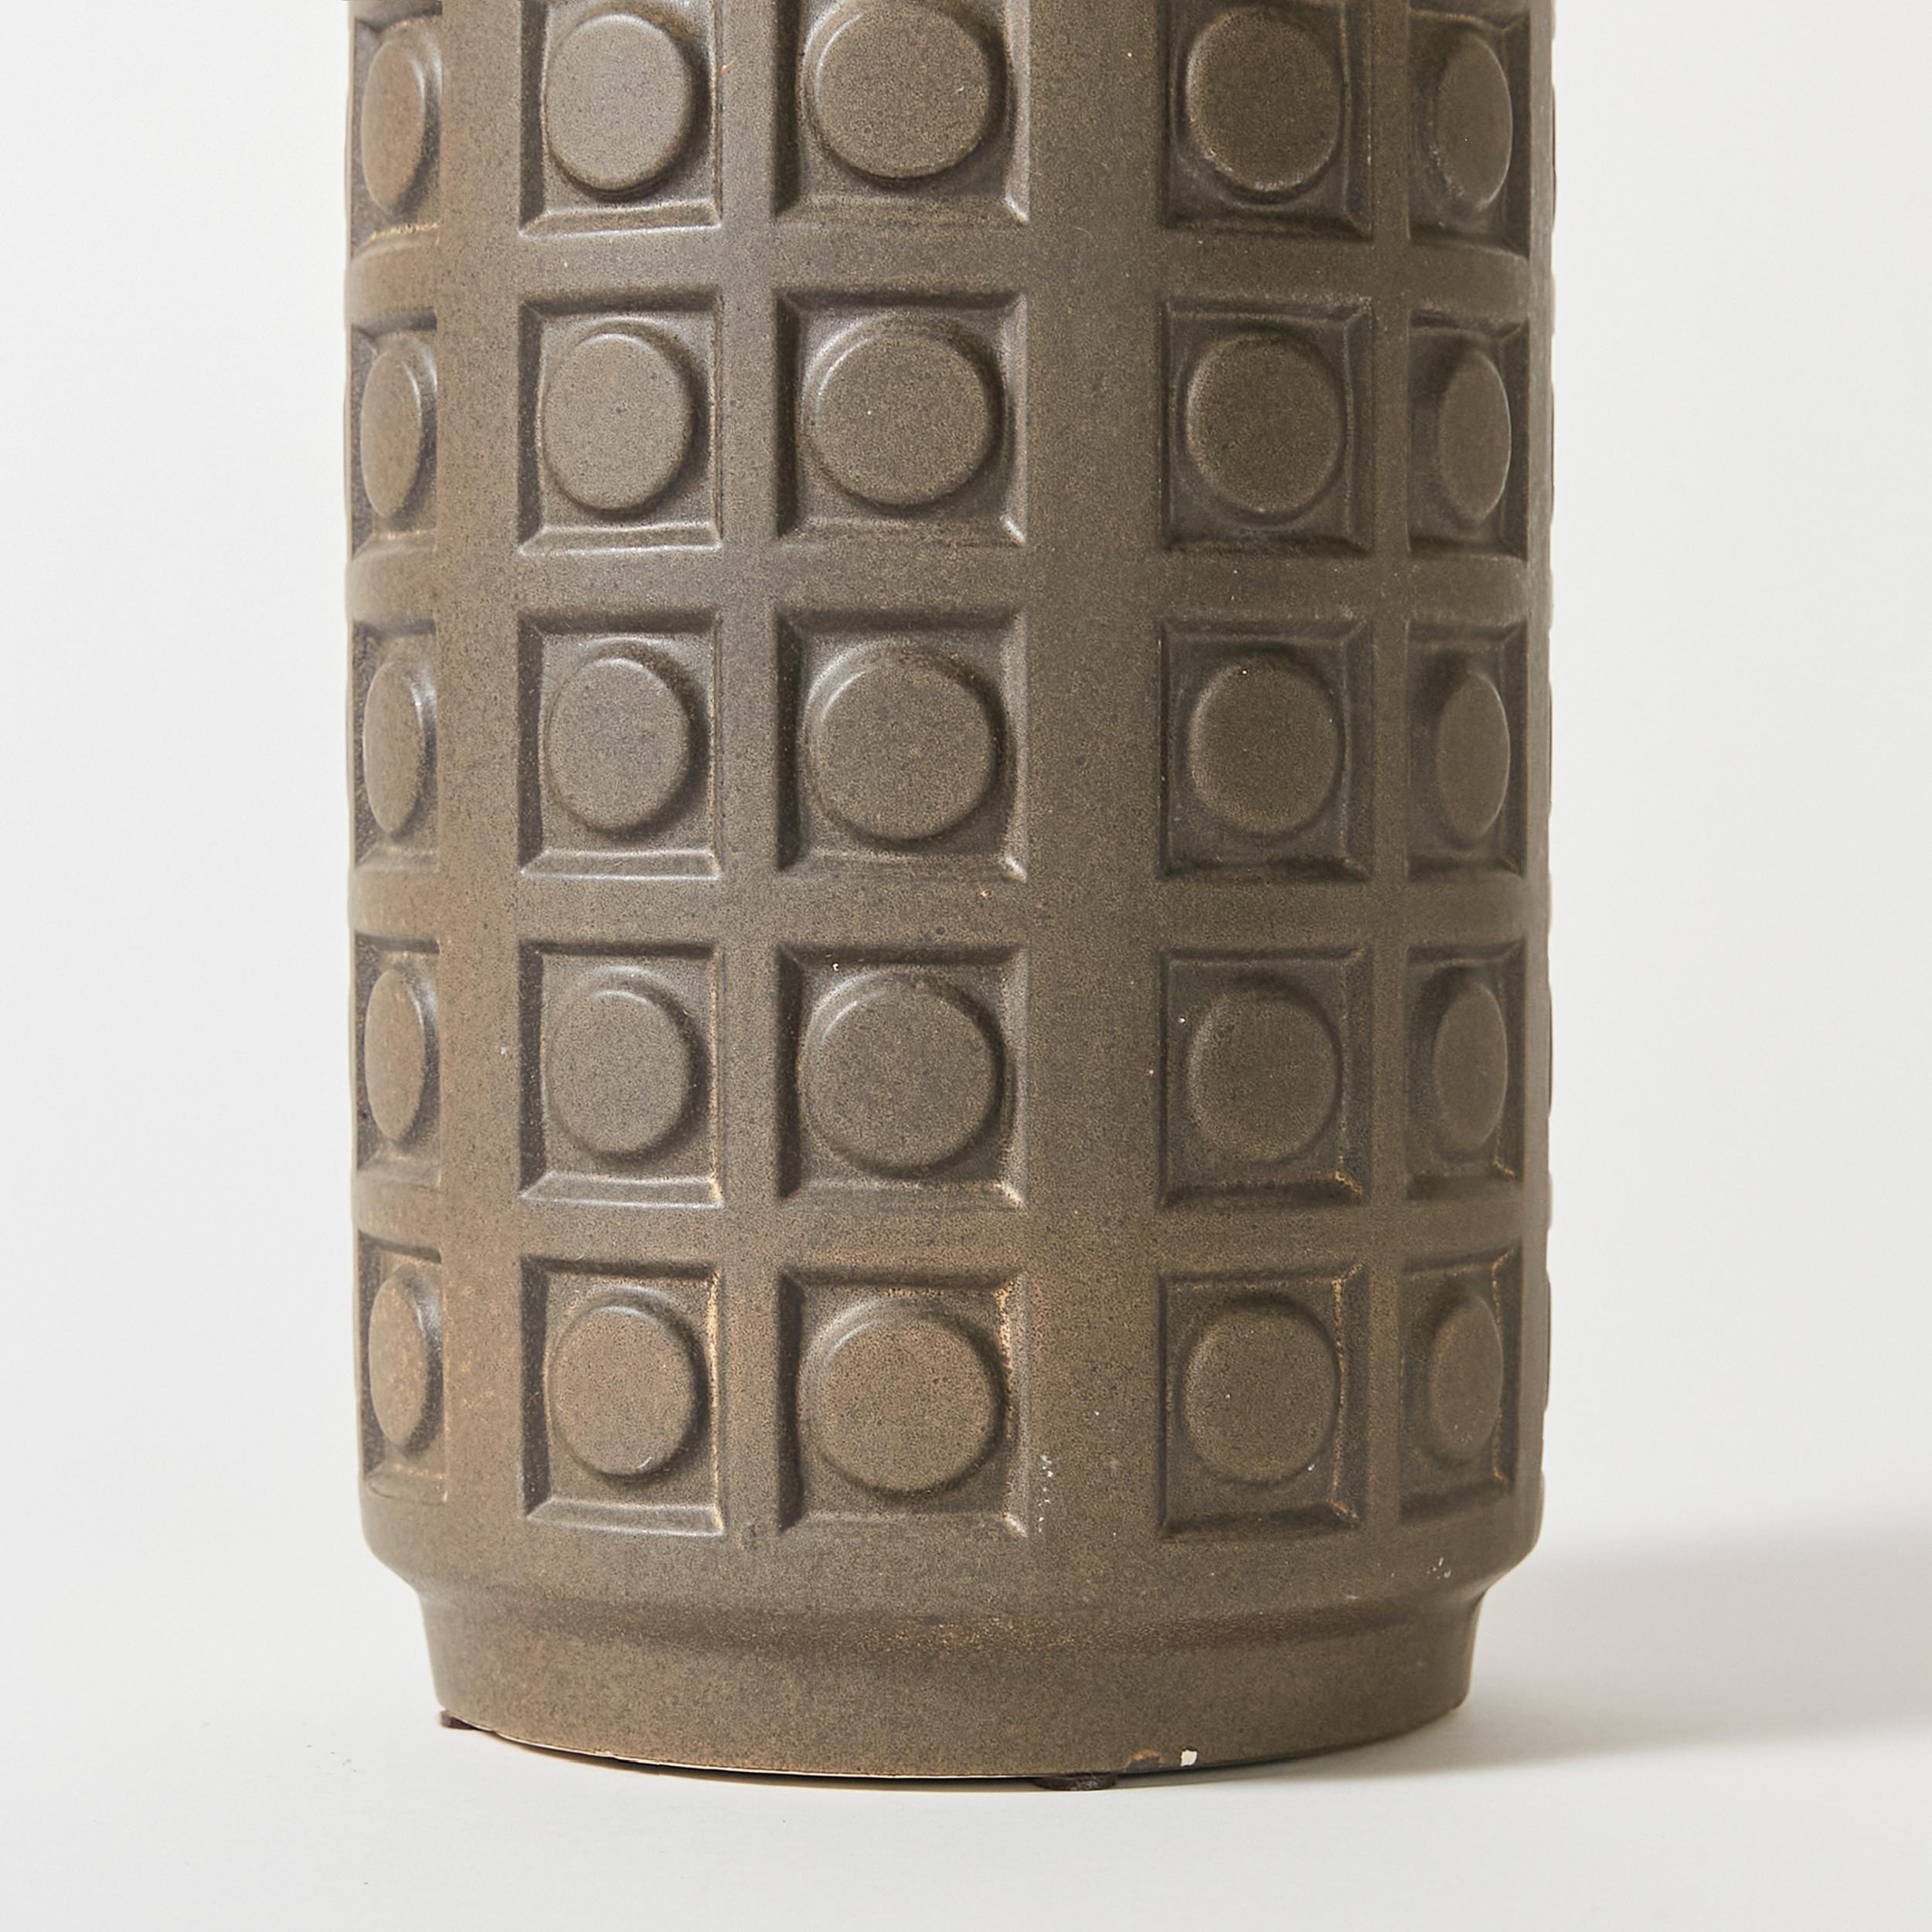 Midcentury Ceramic Vase Circle and Square Patterned Brown Glazed, West Germany For Sale 1